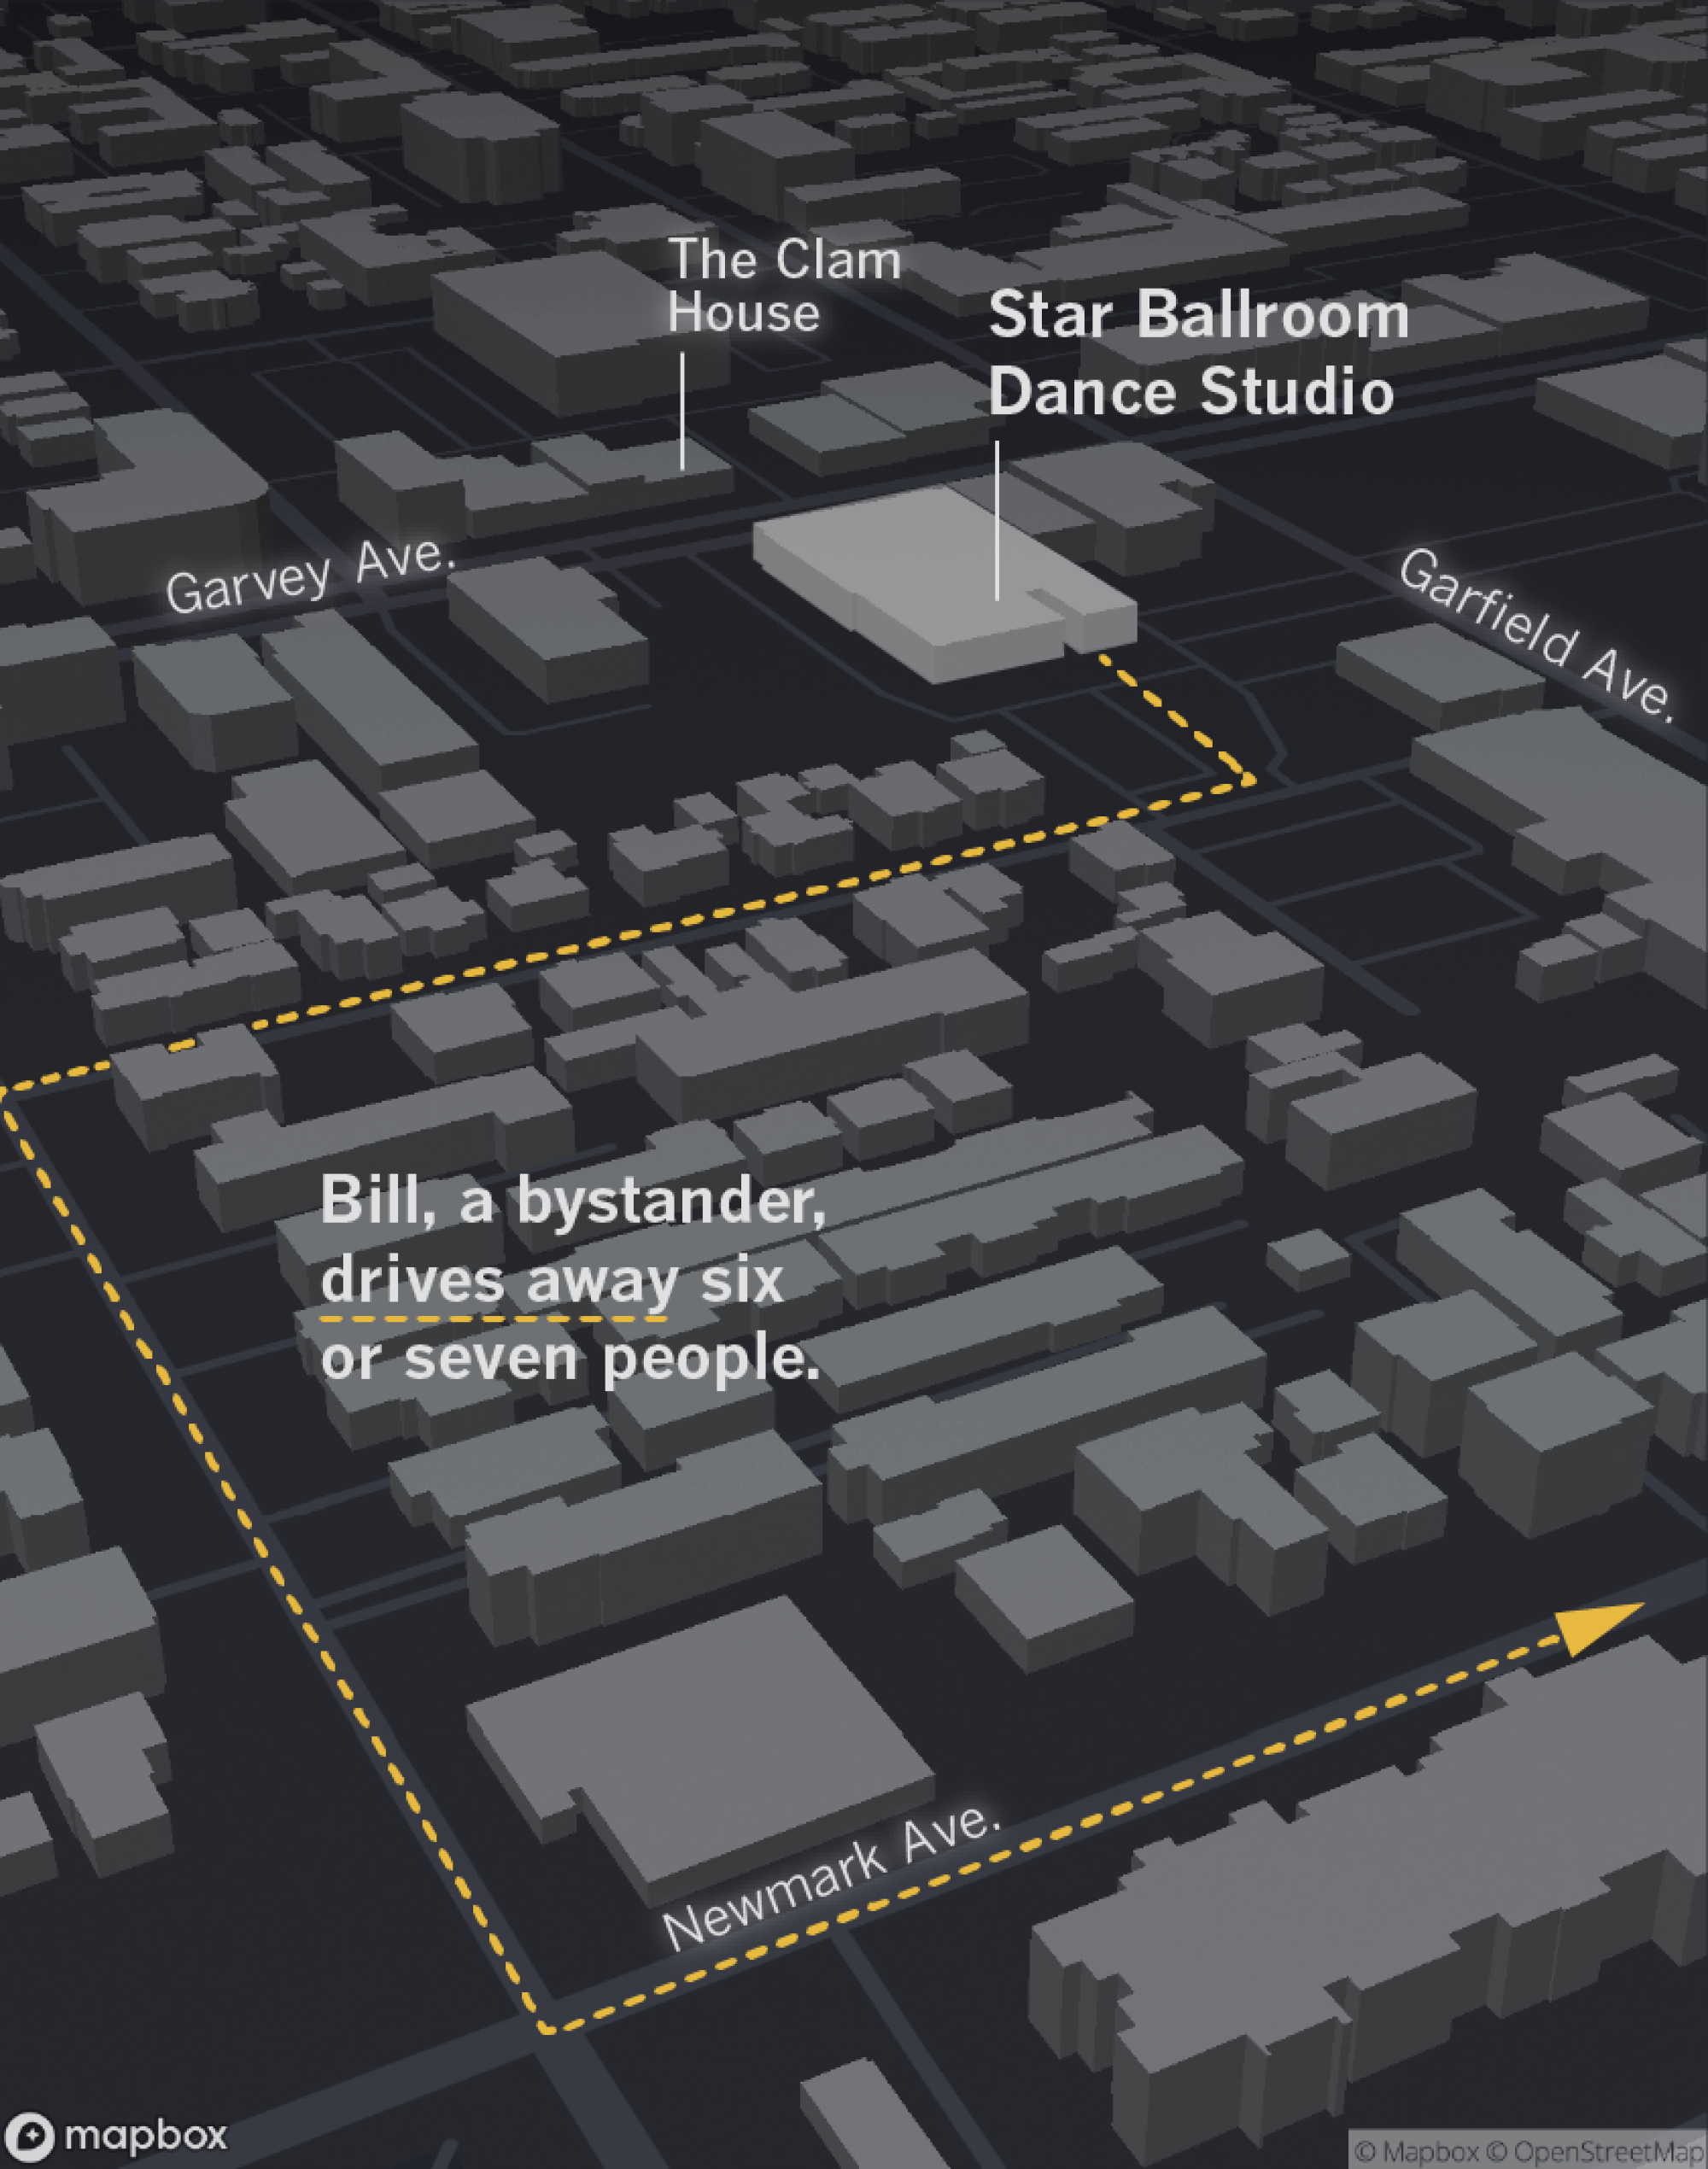 Map of Star Ballroom and surrounding buildings.